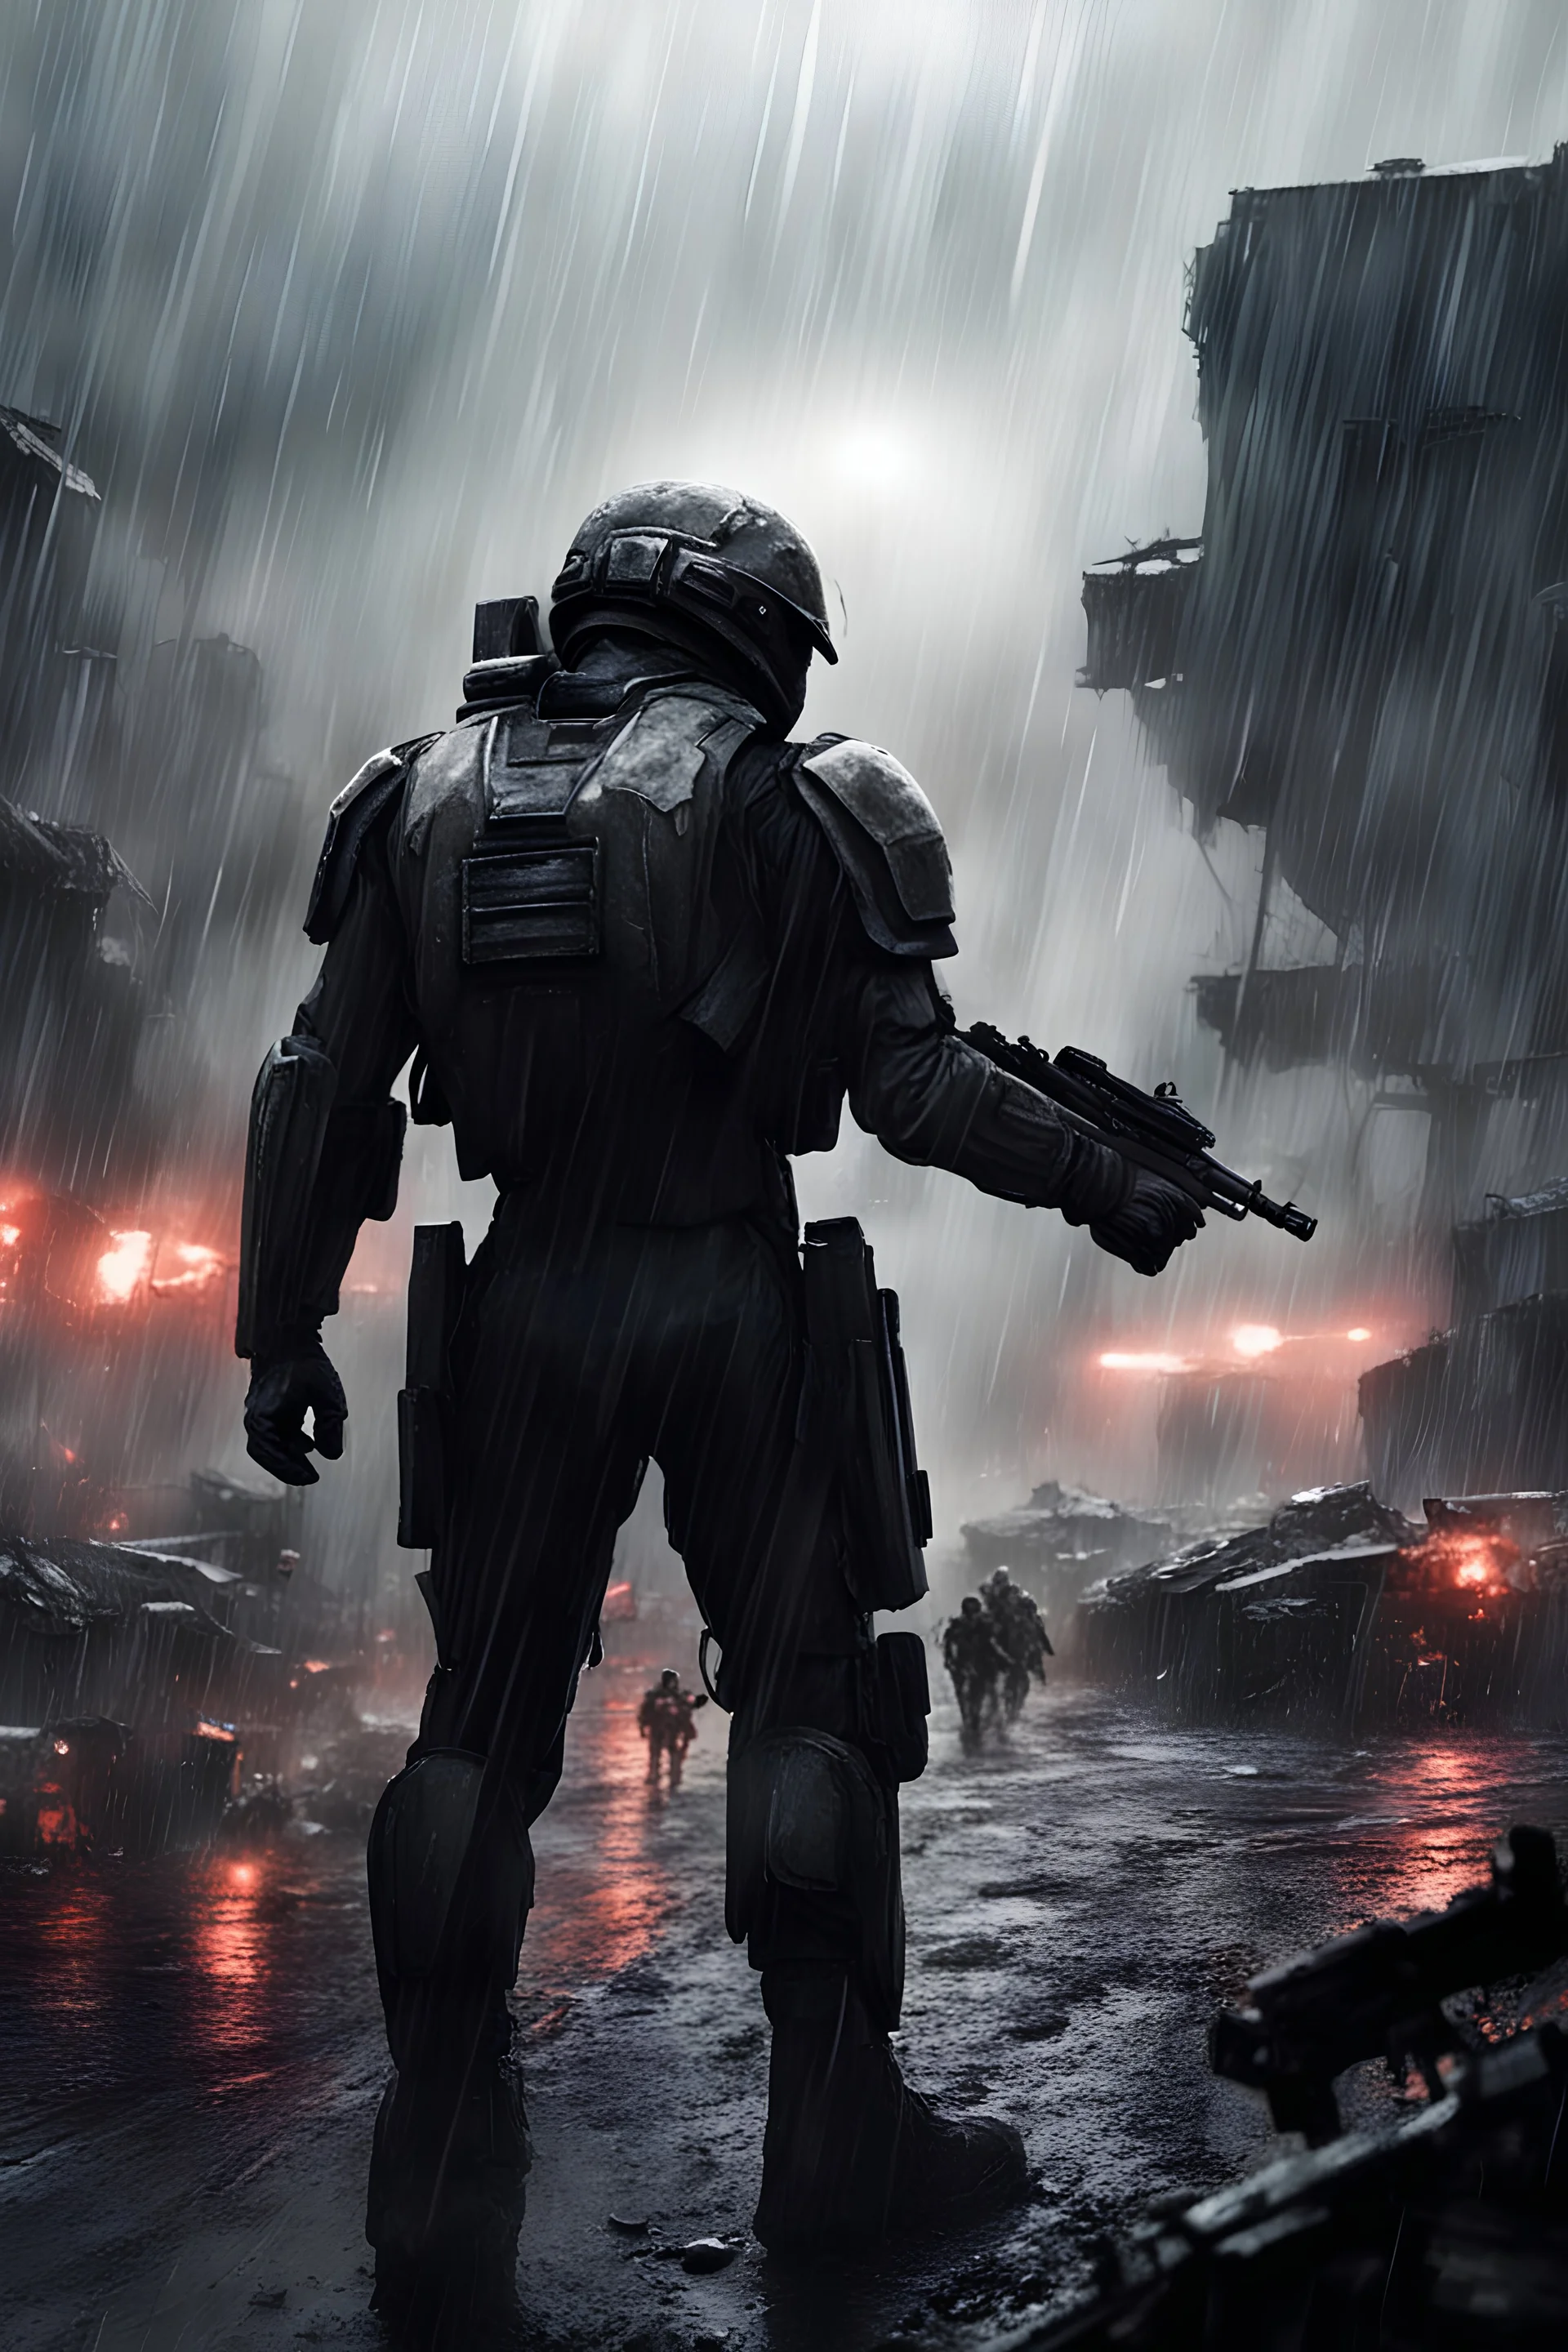 bloody single halo odst sad last stand moment with a single soilder fighting for there life cinamatic picture detailed rain and people in battlefeild with no help